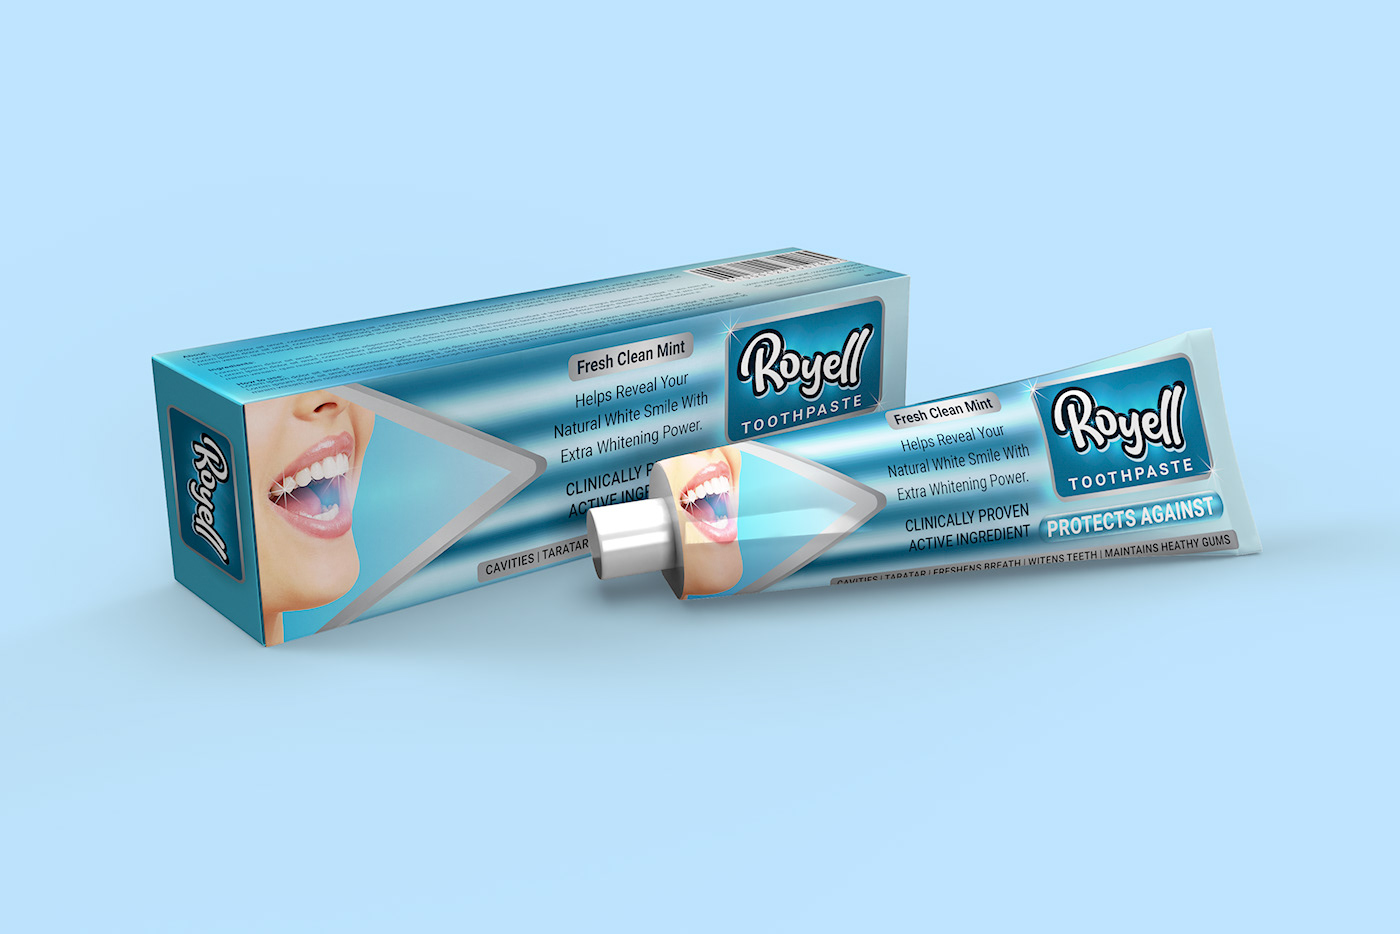 creative packaging deisgn free tooth templete free toothpaste box free toothpaste templete paste product packaging tooth toothopaste toothpaste box deisgn toothpaste label deisgn